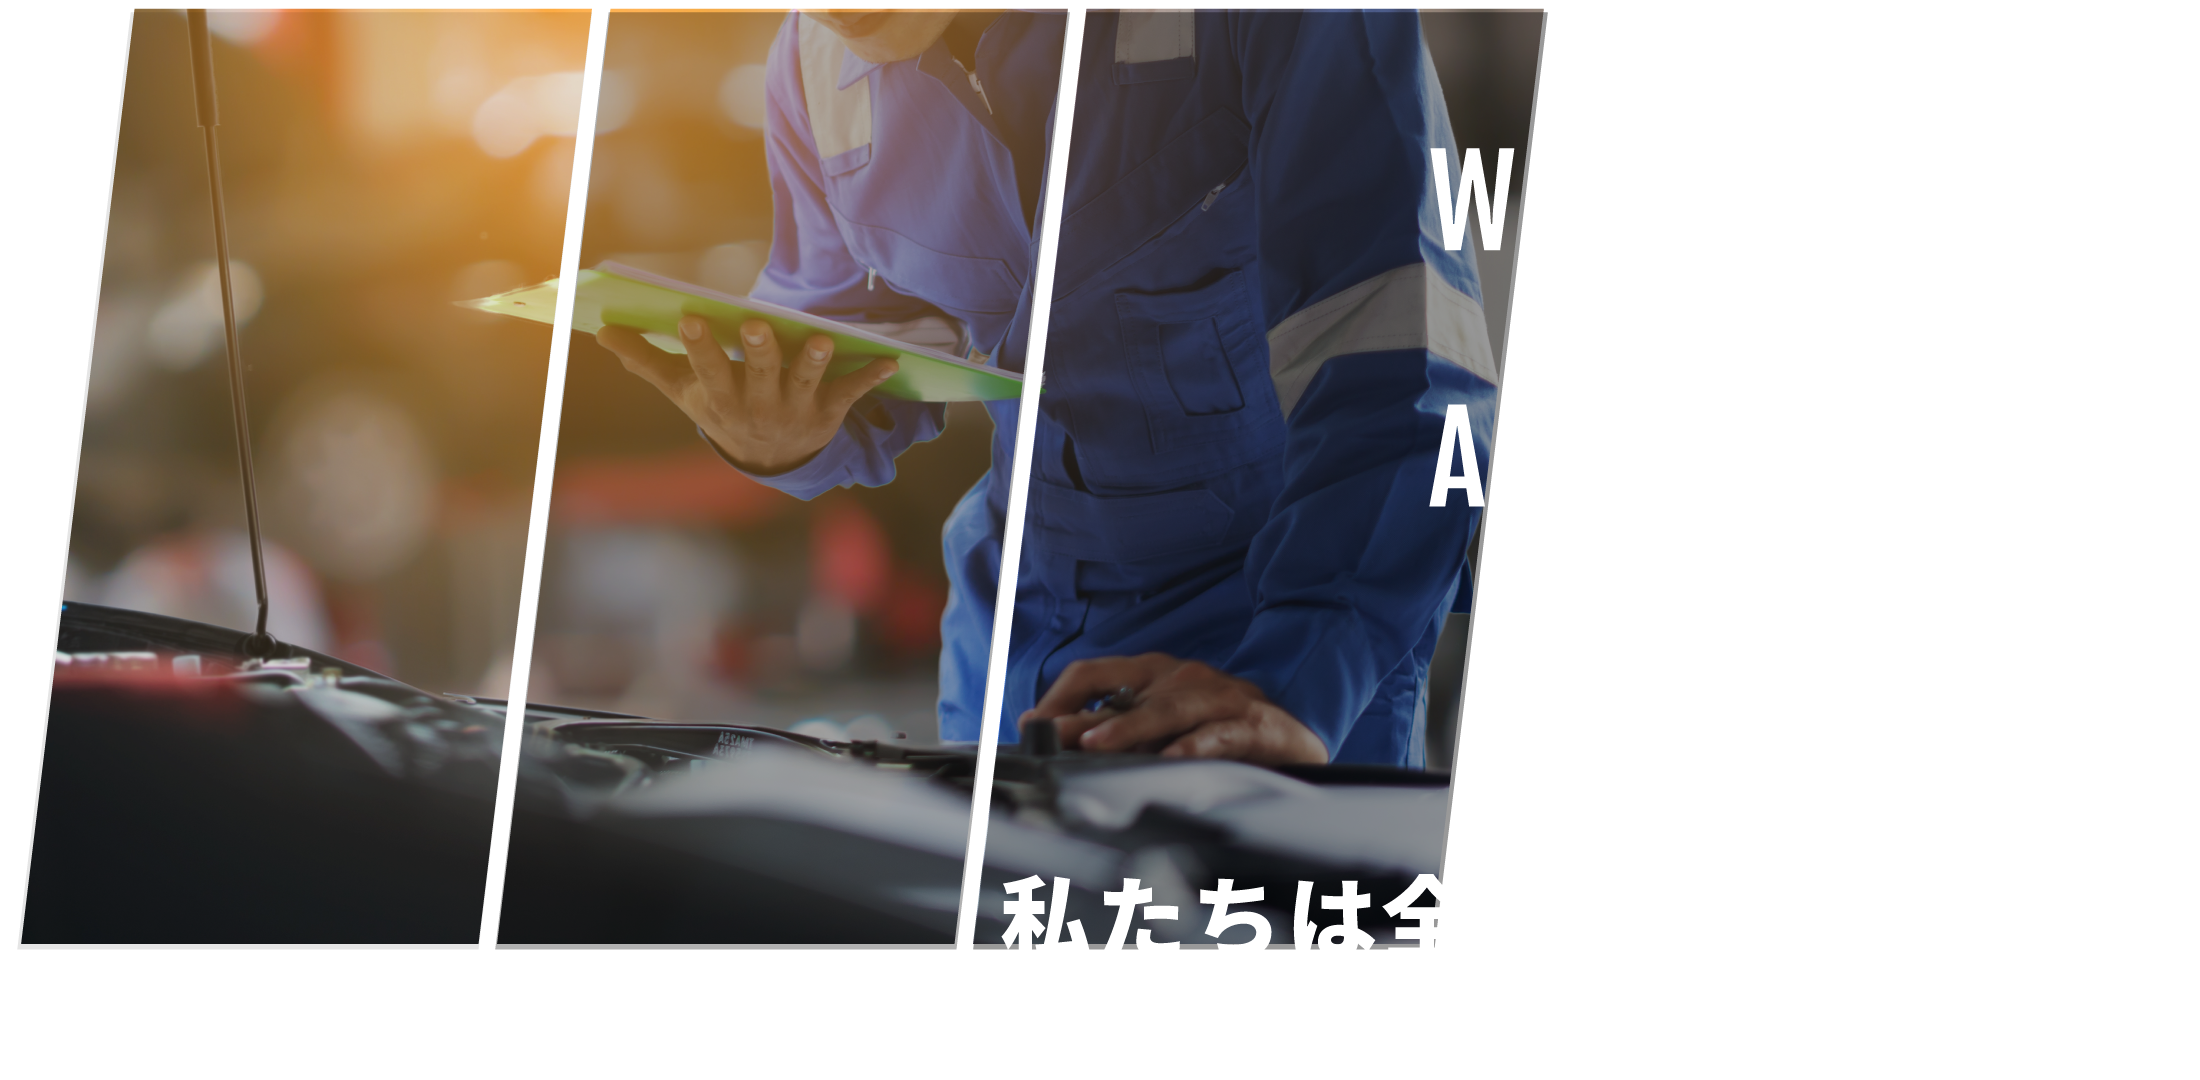 WE ARE EXPERT OF AUTO PARTS INSPECTION 私たちは全ての自動車部品に関する検査の専門家です。